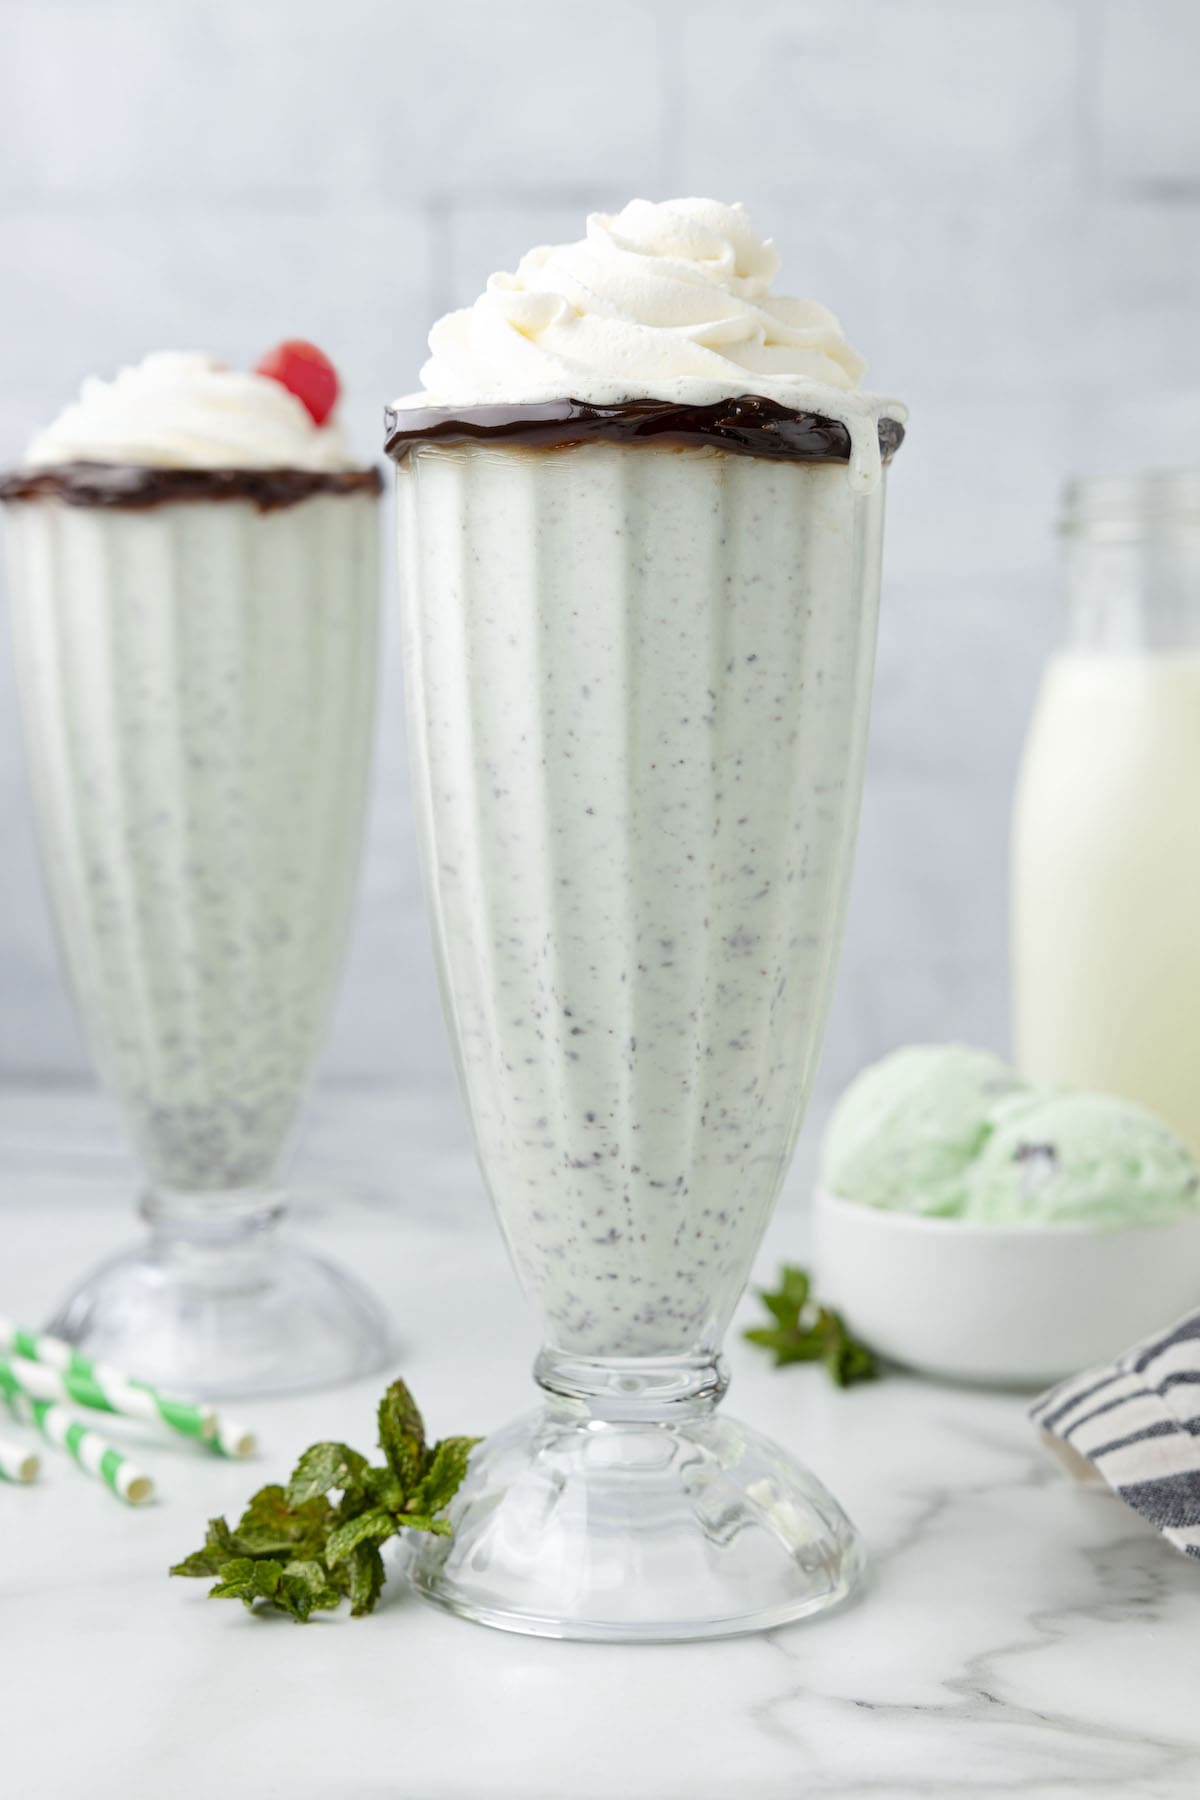 mint milkshake in a tall glass cup with whipped cream on top dripping down the side